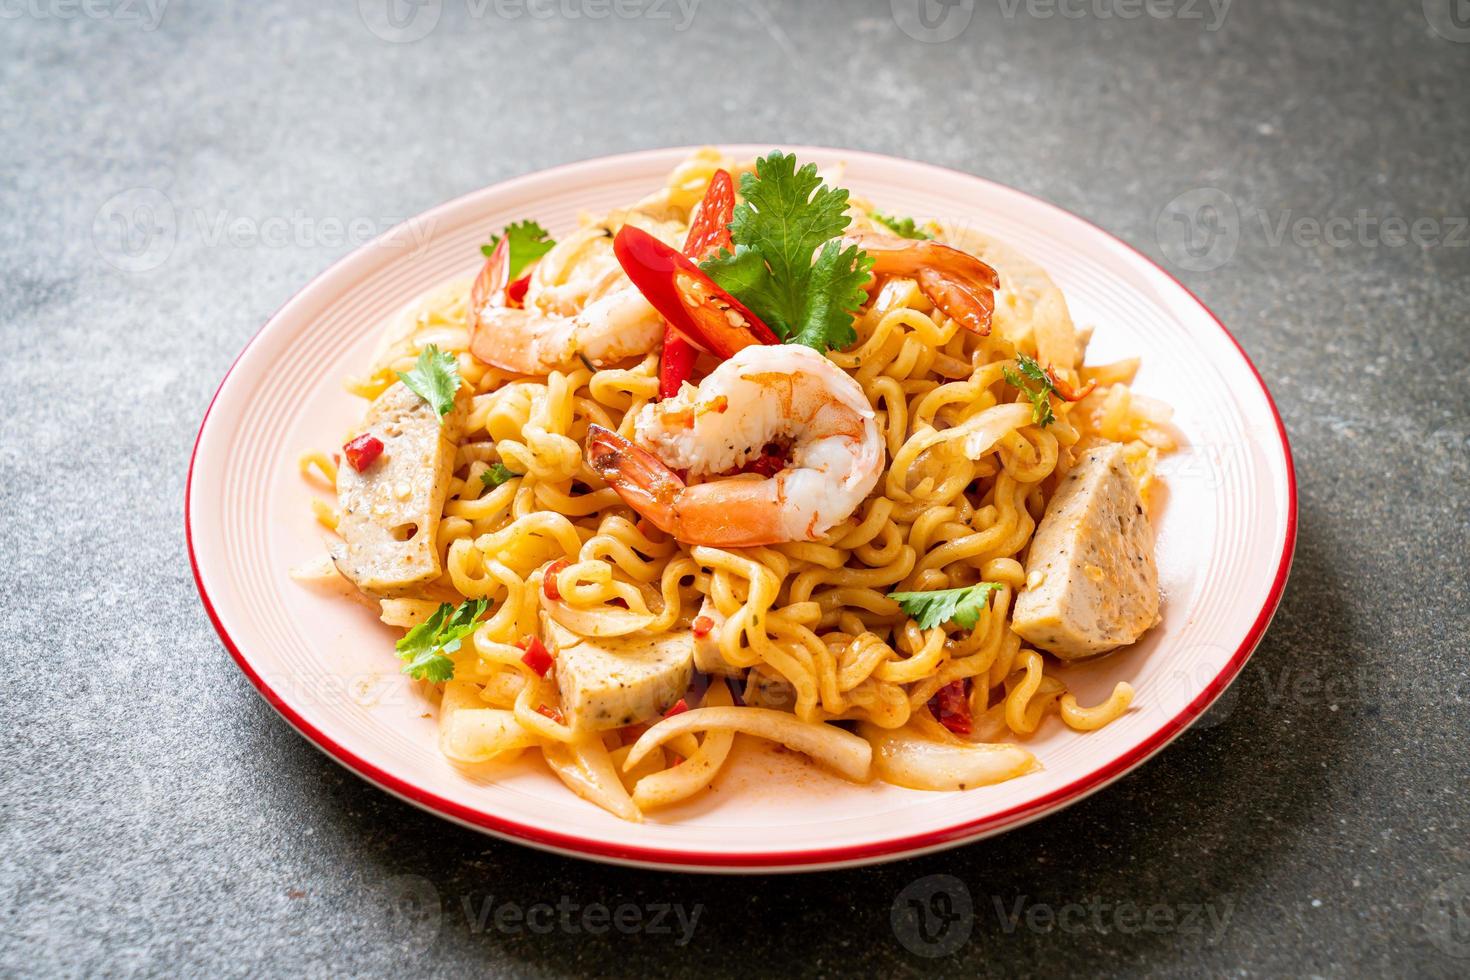 Spicy instant noodles salad with shrimps - Thai food style photo